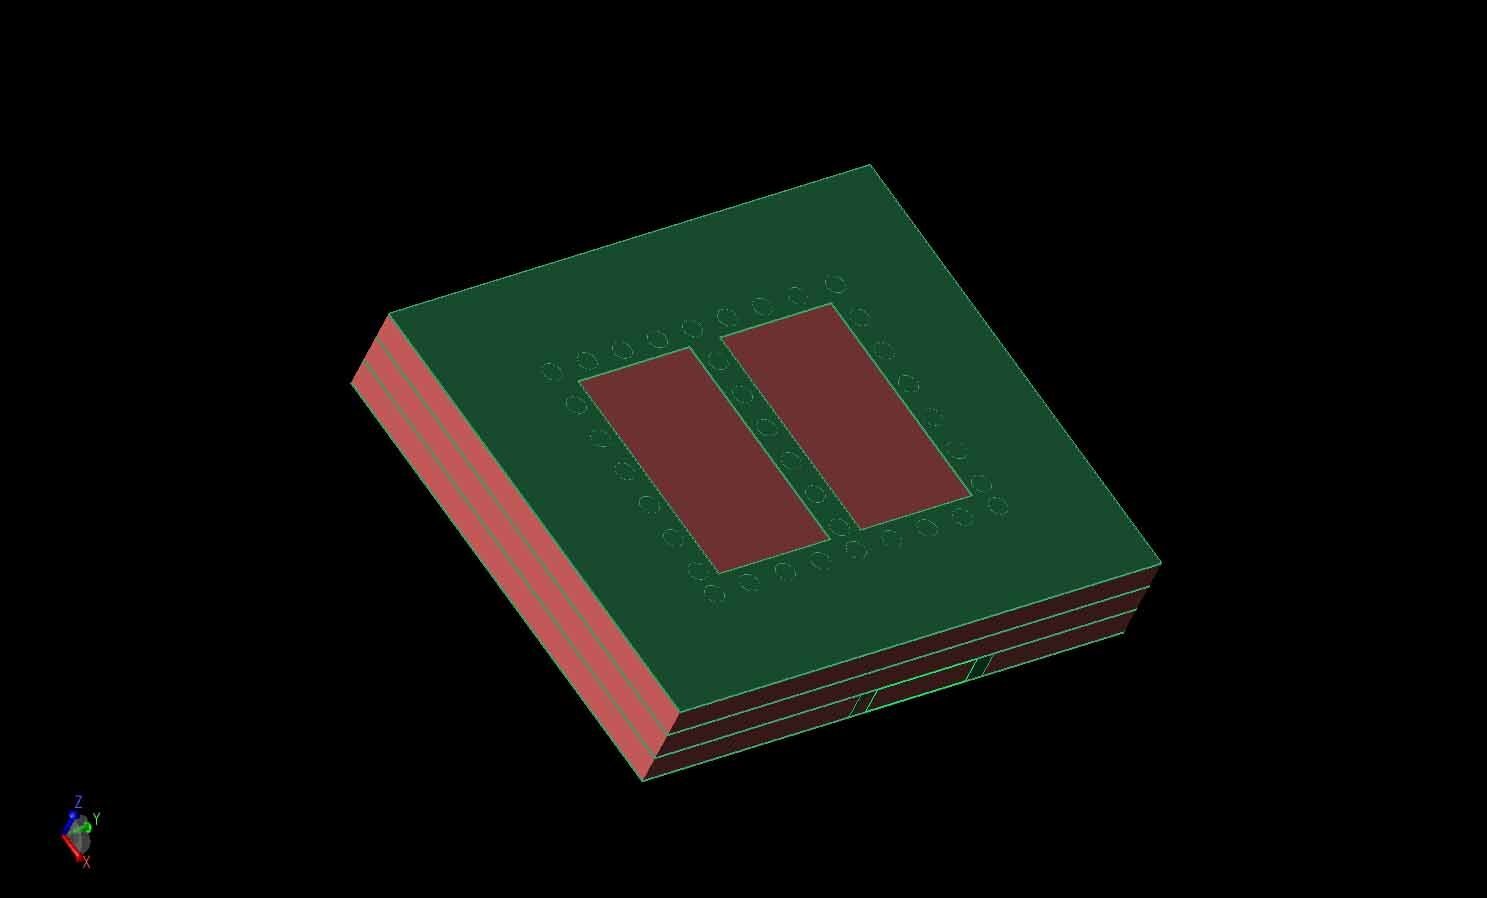 Figure 1:  A three-dimensional CAD rendering of the SIC excited 2x2 antenna element is shown with metal layers in green and LTCC layers in red.